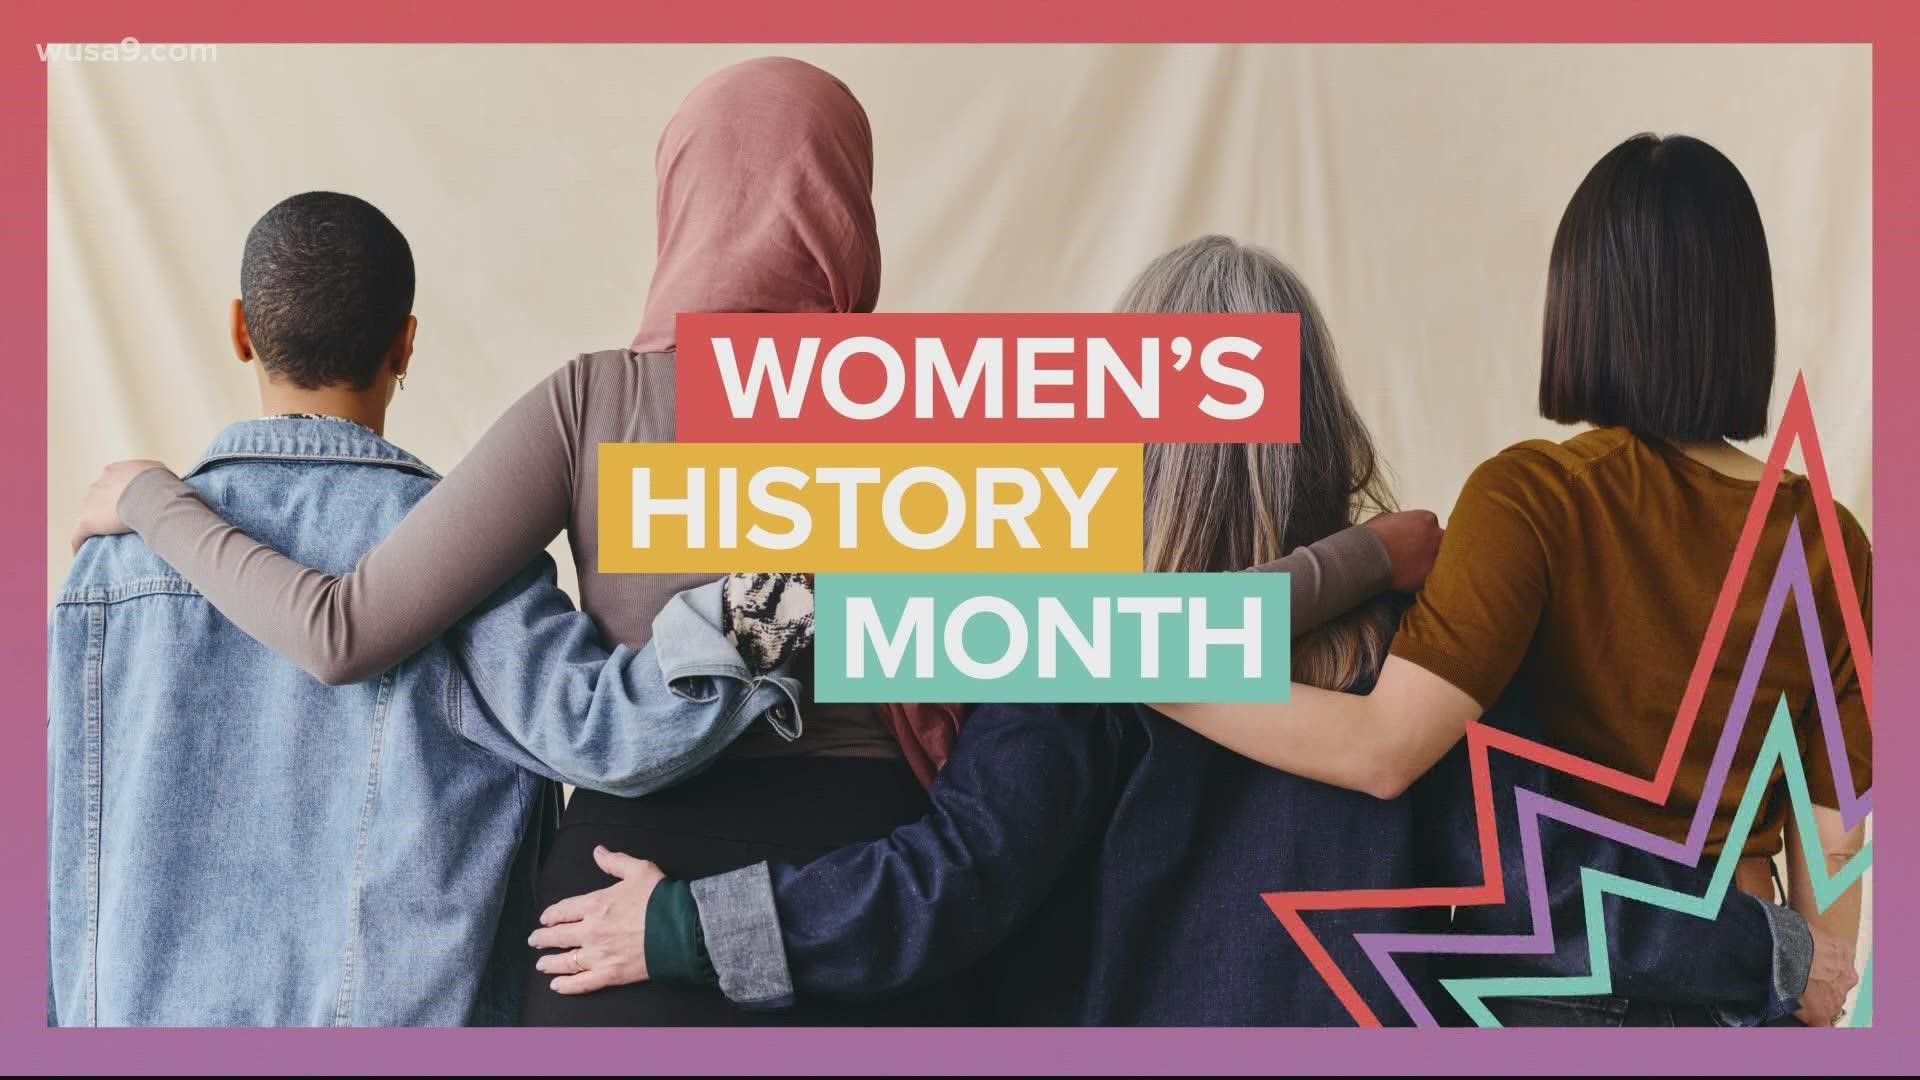 WUSA9 Get UP DC Anchor Allison Seymour leads our celebration of Women’s History Month with these inspiring stories. Watch as we celebrate HERstory this month!